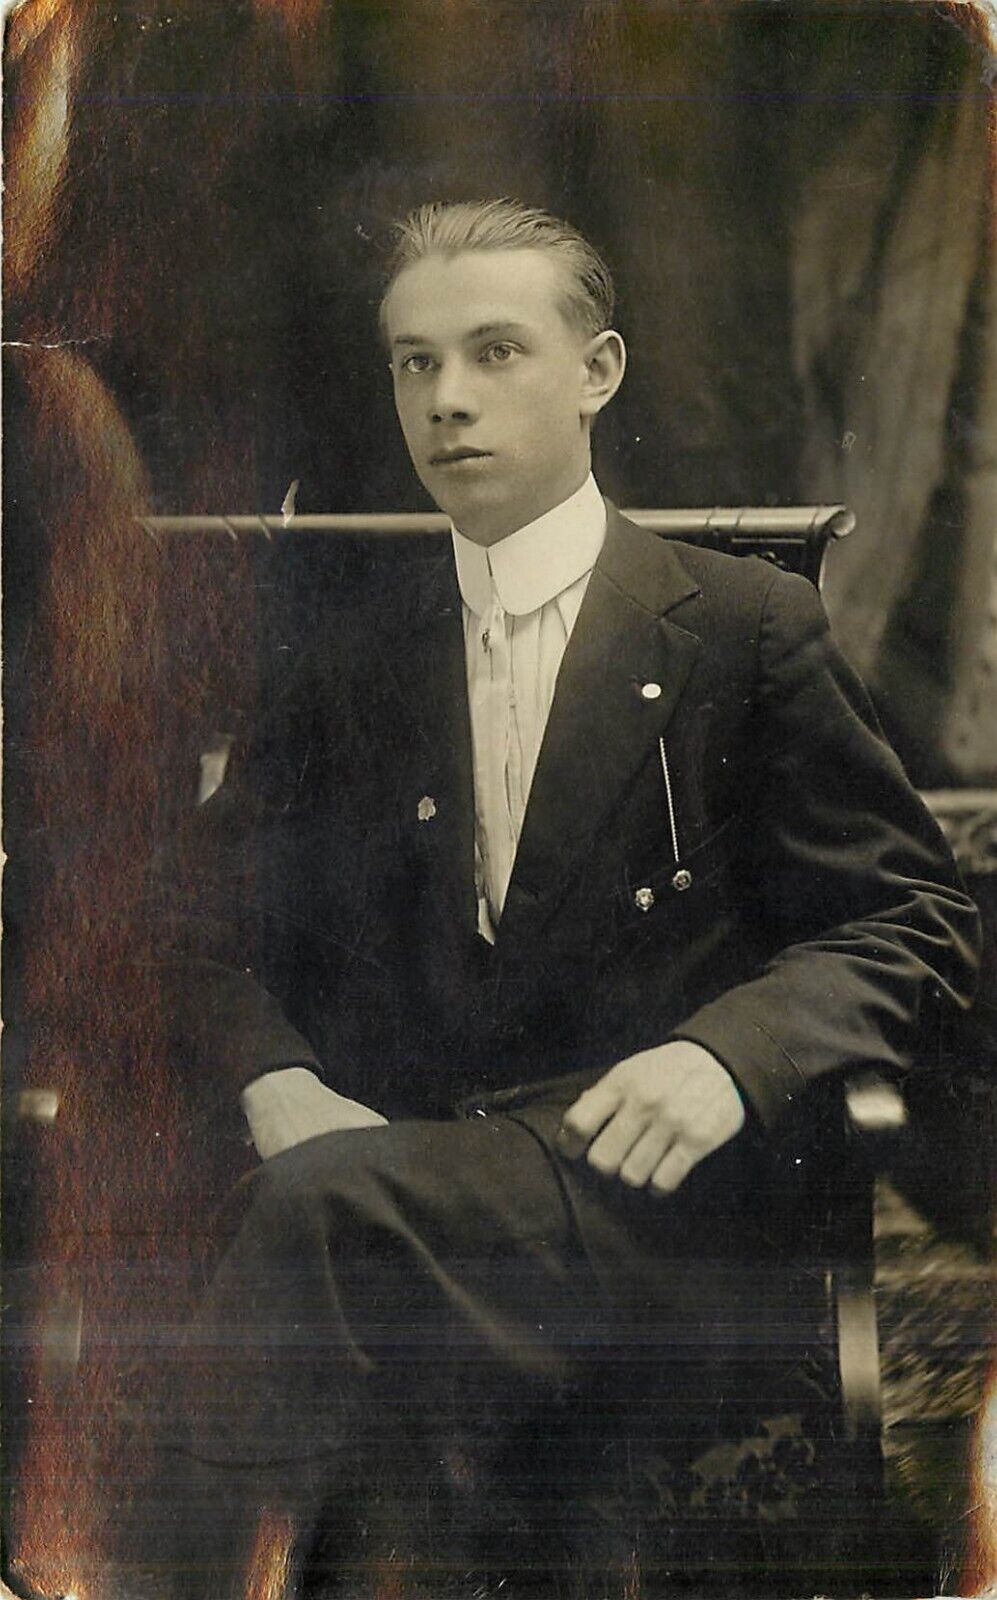 Young Man in Suit Sitting in Chair RPPC c 1915 Postcard